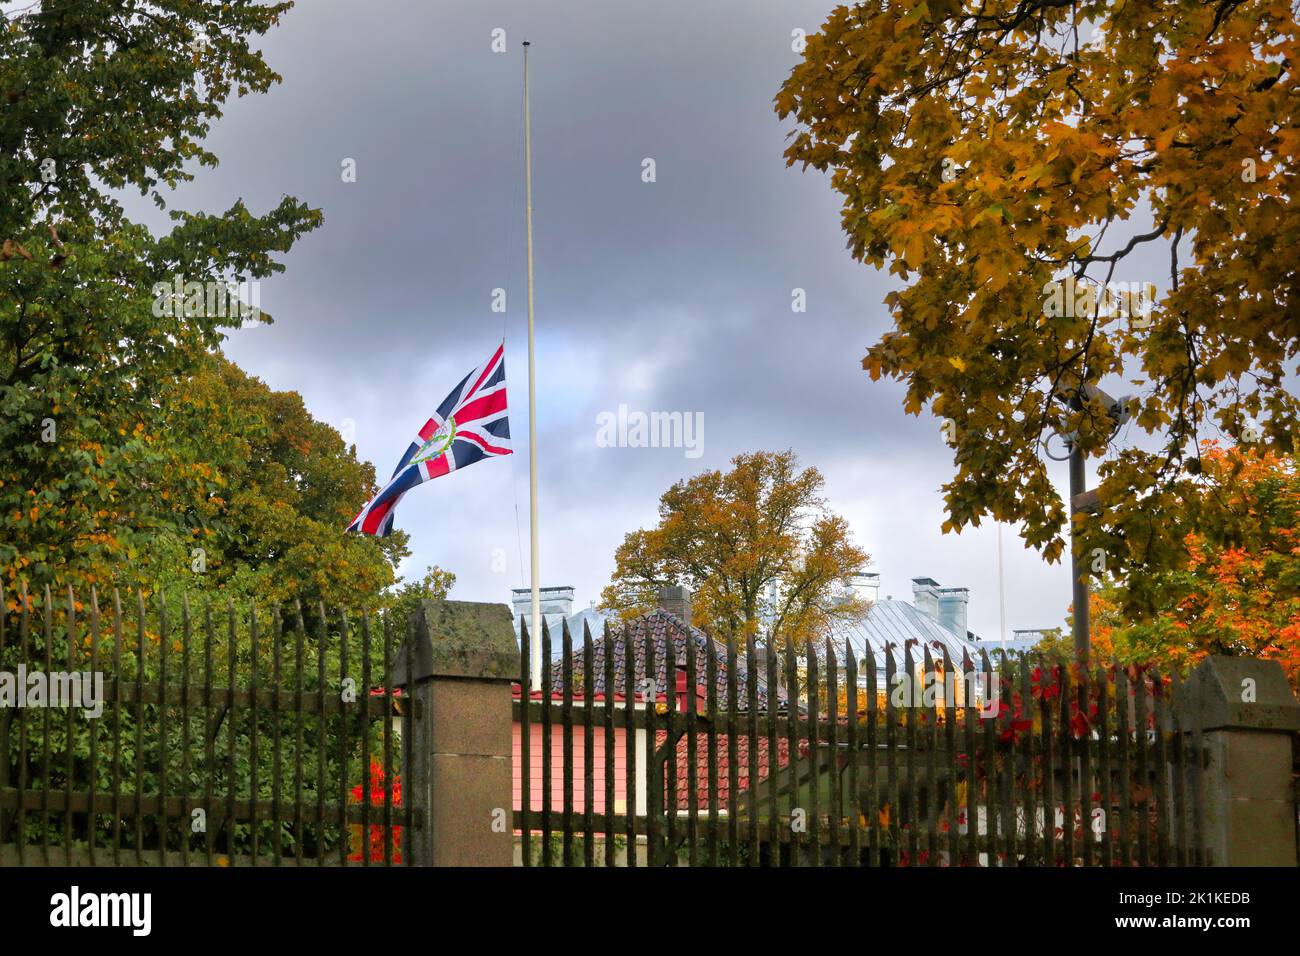 Helsinki, Finland. 19th September 2022. Her Majesty The Queen Elizabeth II Funeral Day. British diplomatic flag fly at half mast as a sign of respect to the passing of Her Majesty The Queen Elizabeth II, aged 96, on 8th September 2022, outside the British Embassy in Helsinki, Finland. Credit: Taina Sohlman Stock Photo